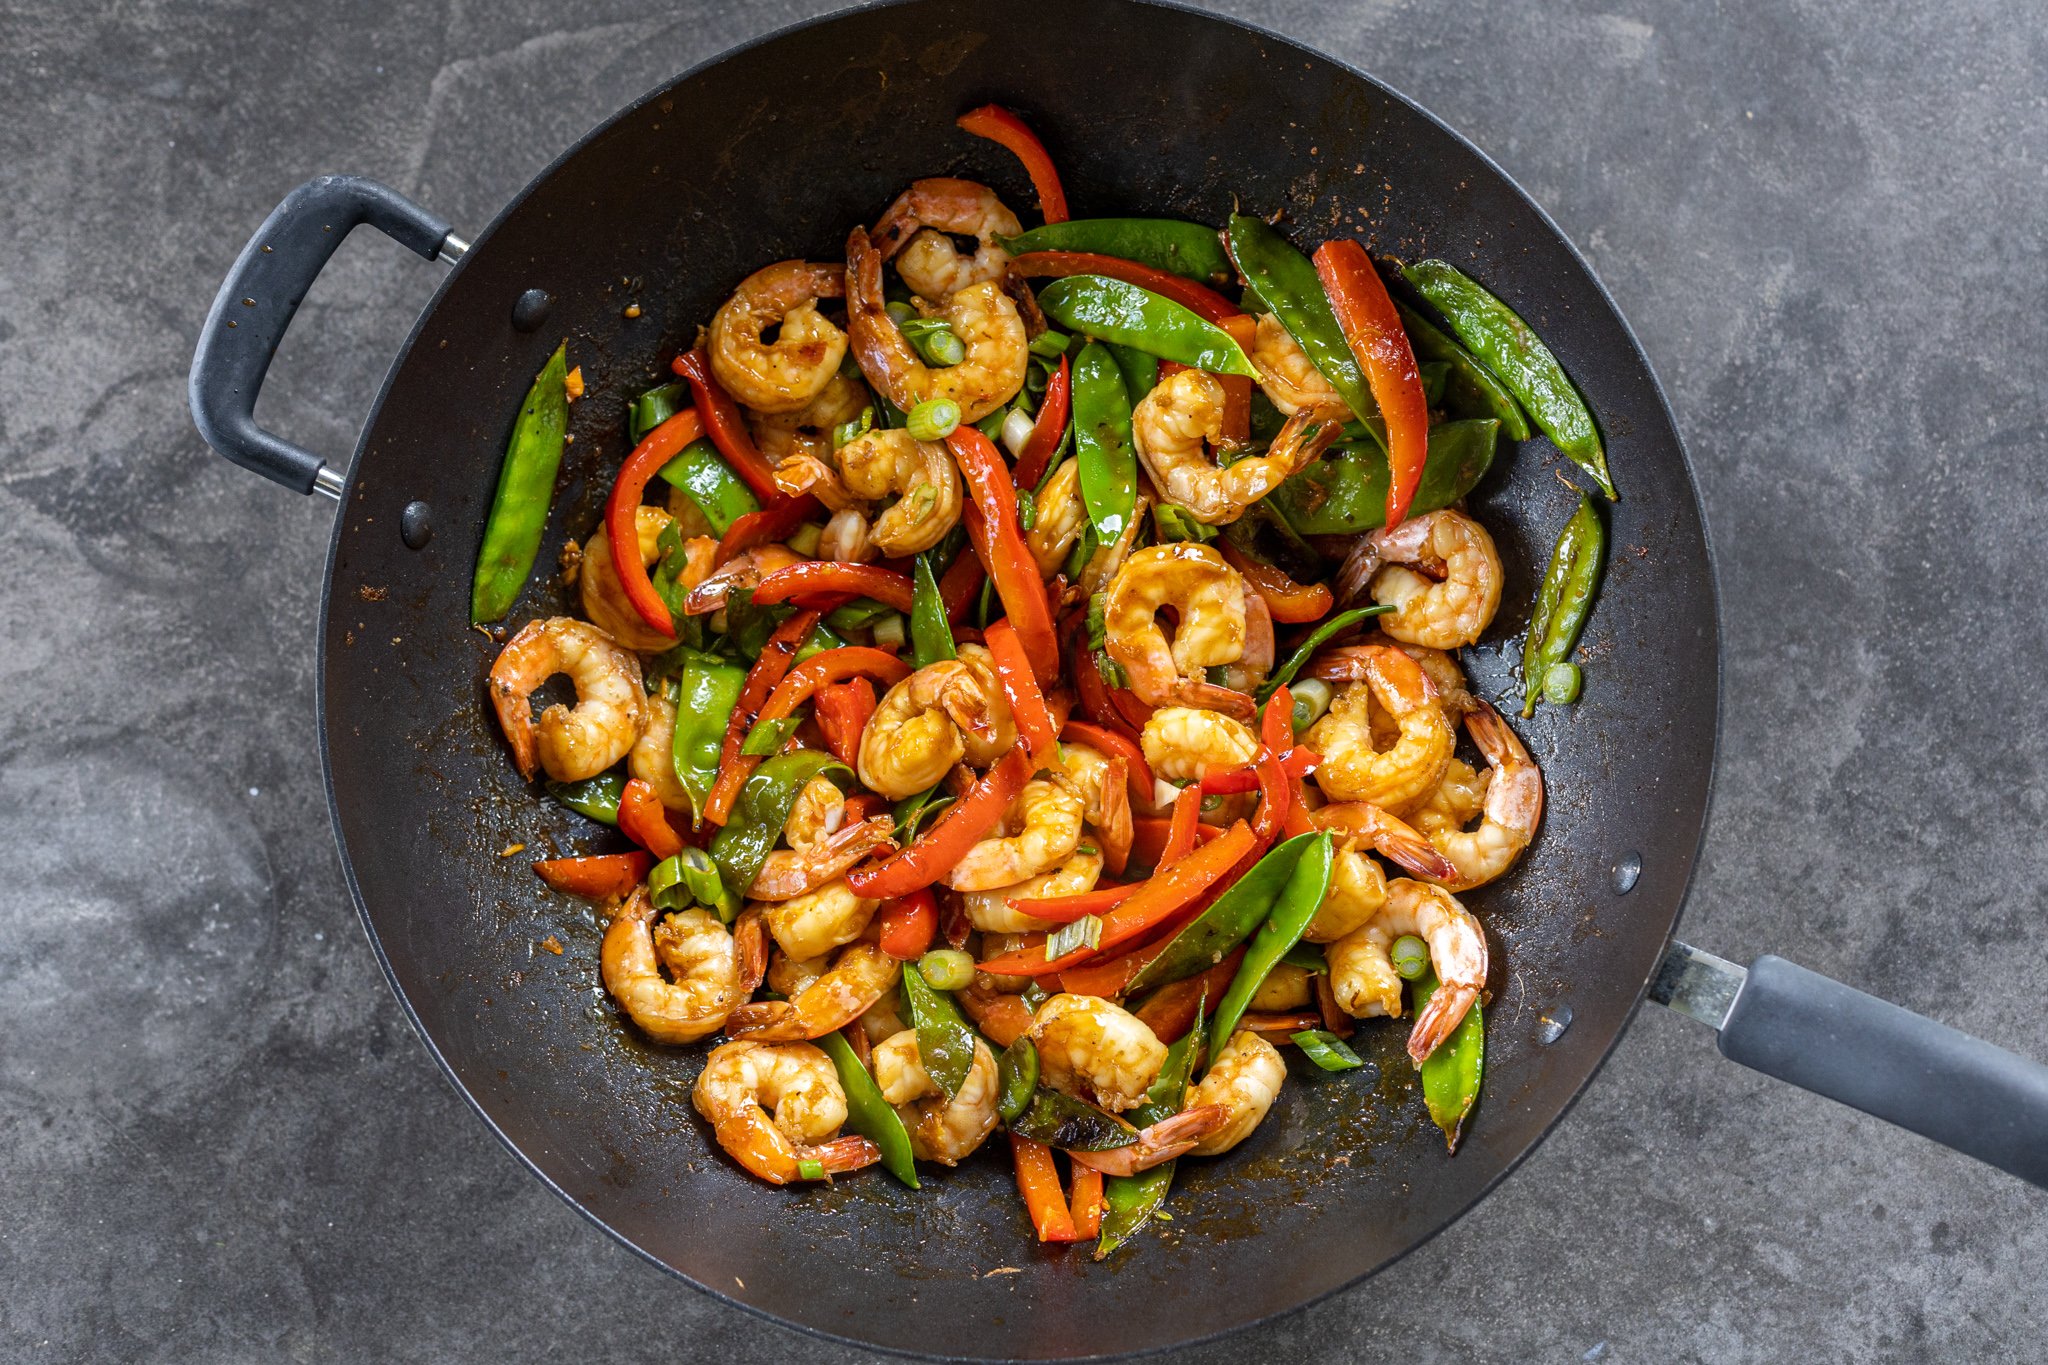 Shrimp Stir Fry in our NEW 14” Wok tonight! 🍤 #HexClad, By HexClad